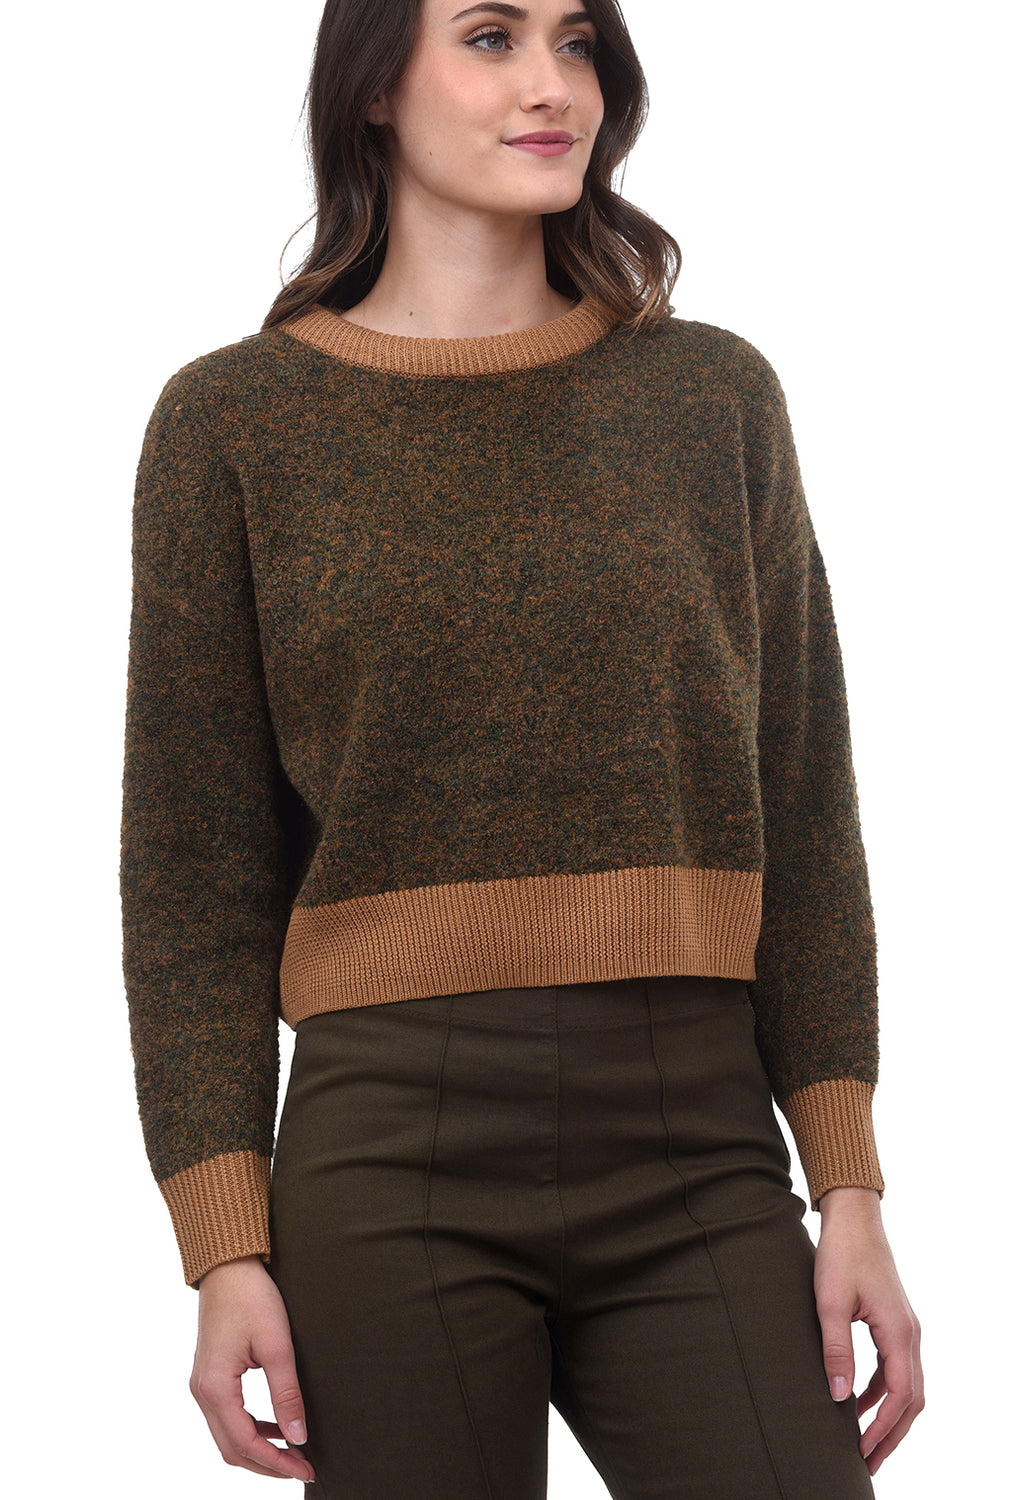 Wooster Sweater, Olive Multi